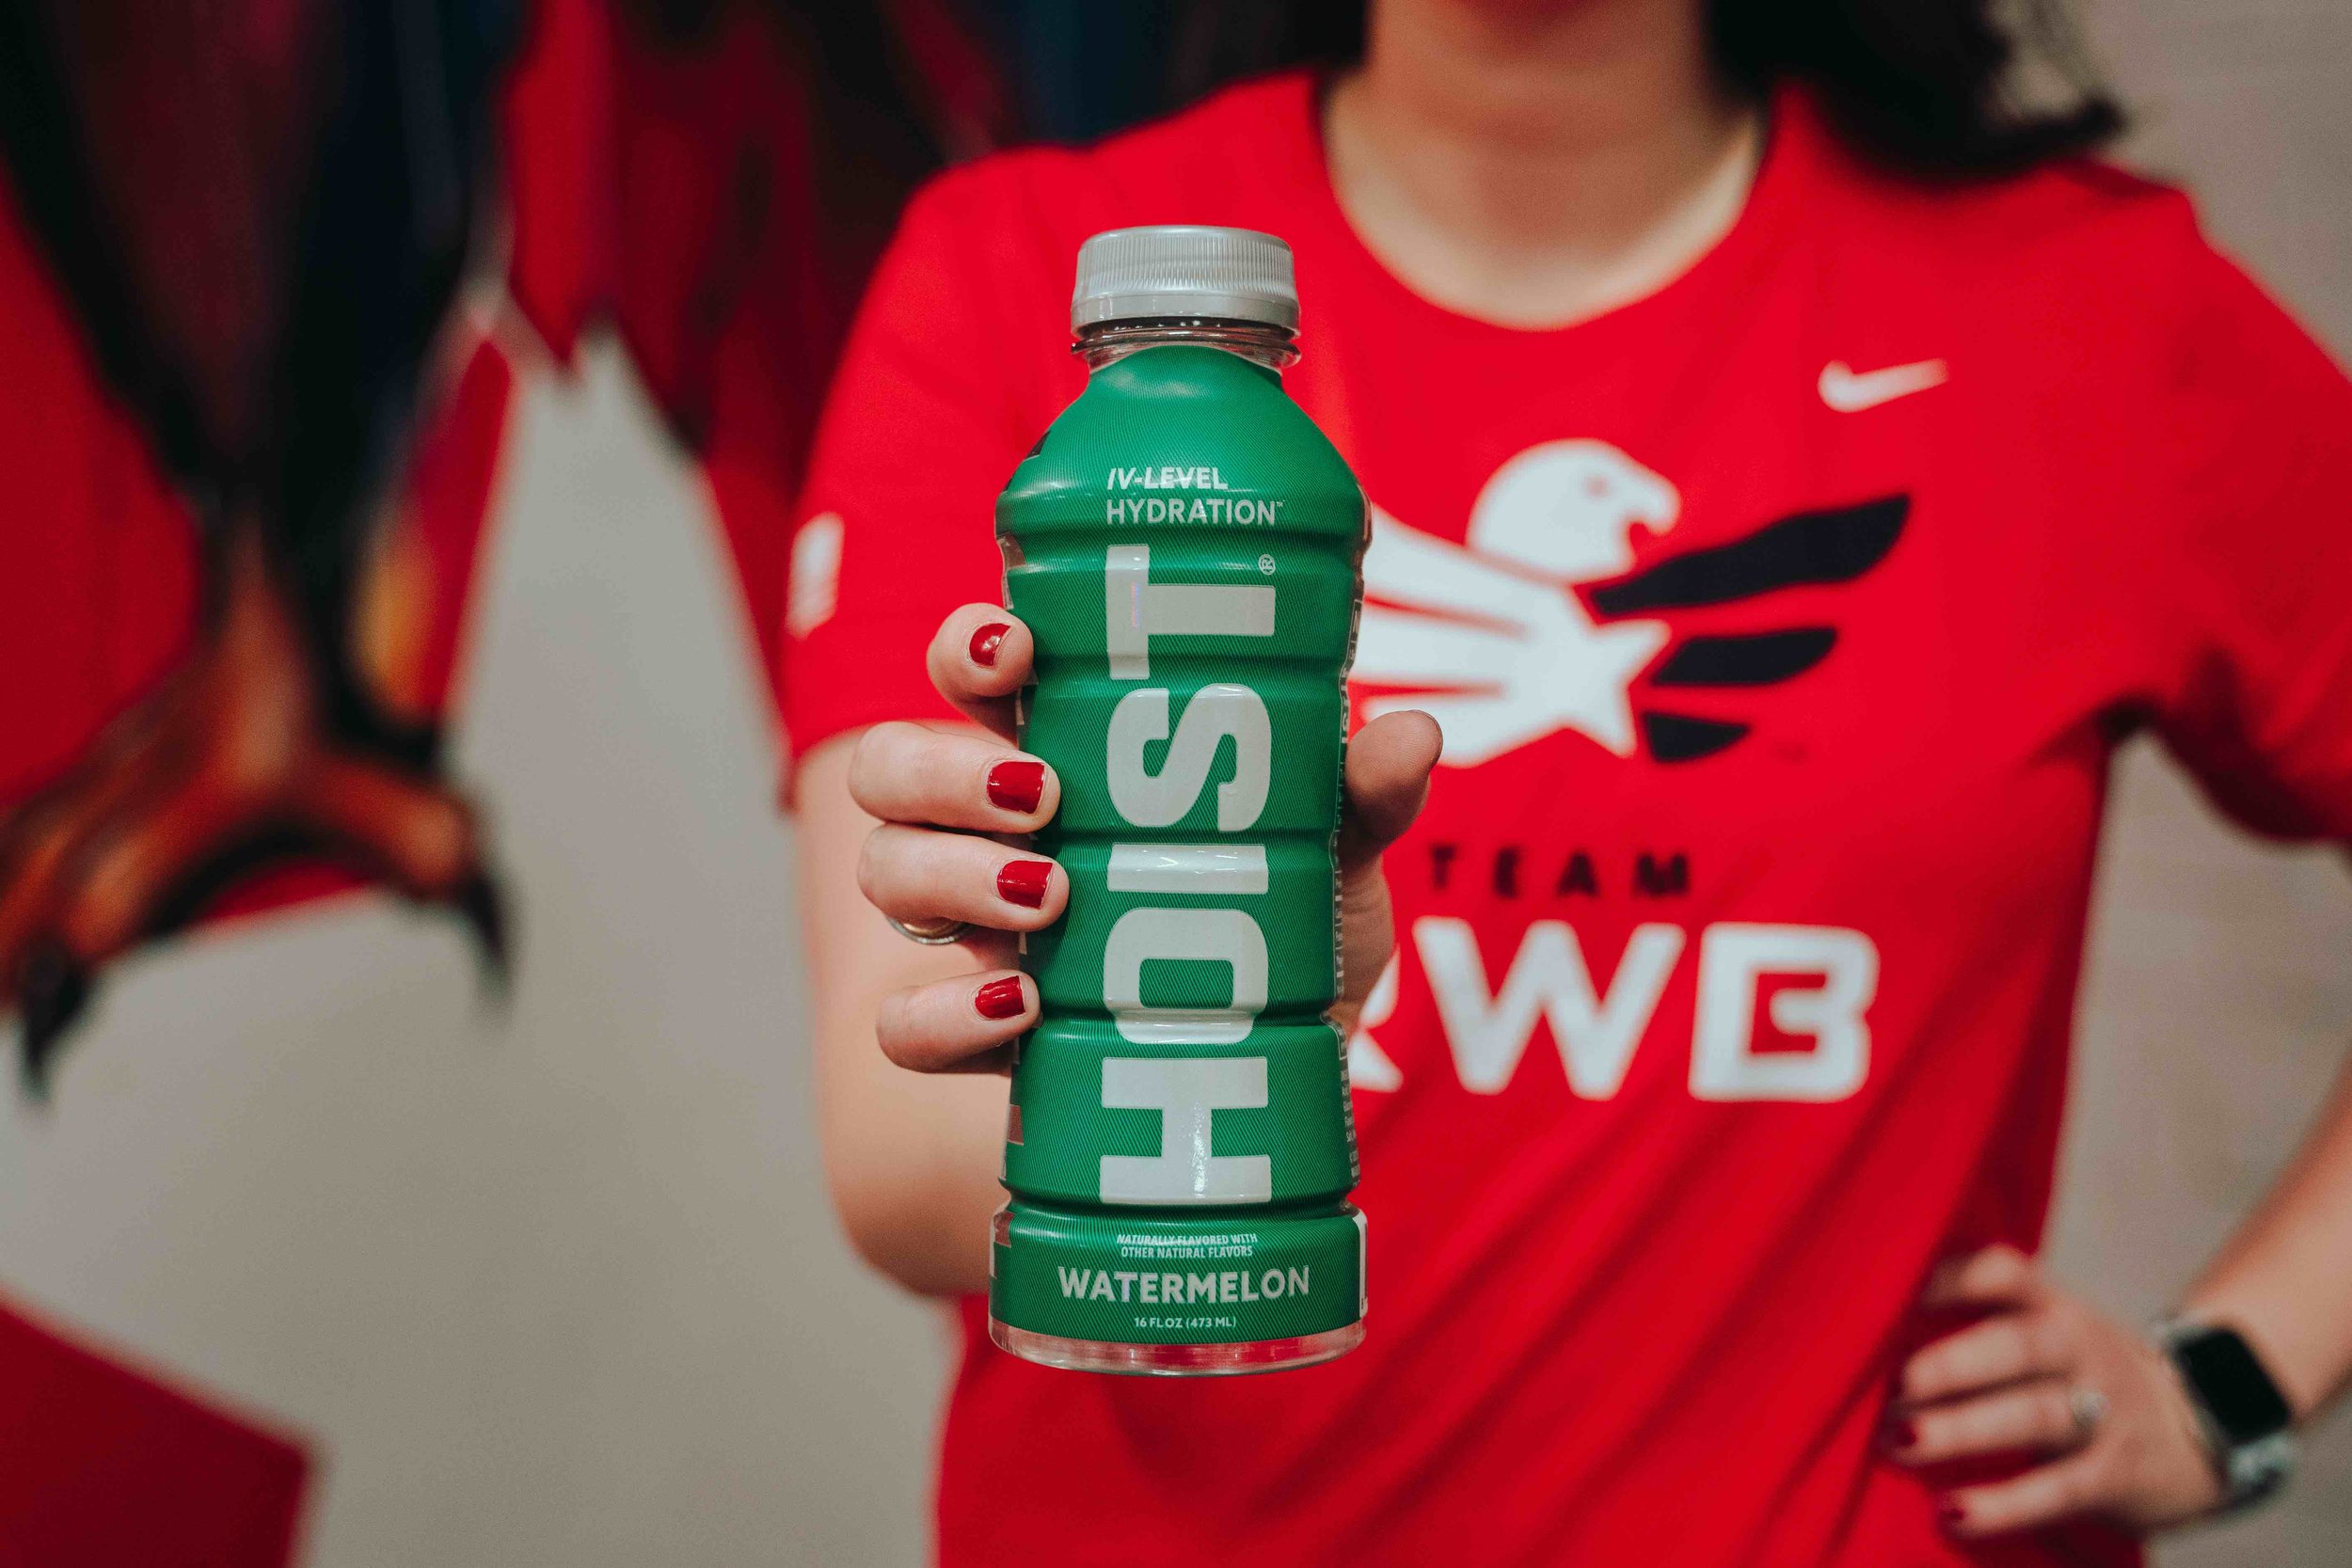 Team RWB, HOIST Announce Expanded Partnership in Support of Veterans’ Health and Wellness&nbsp;